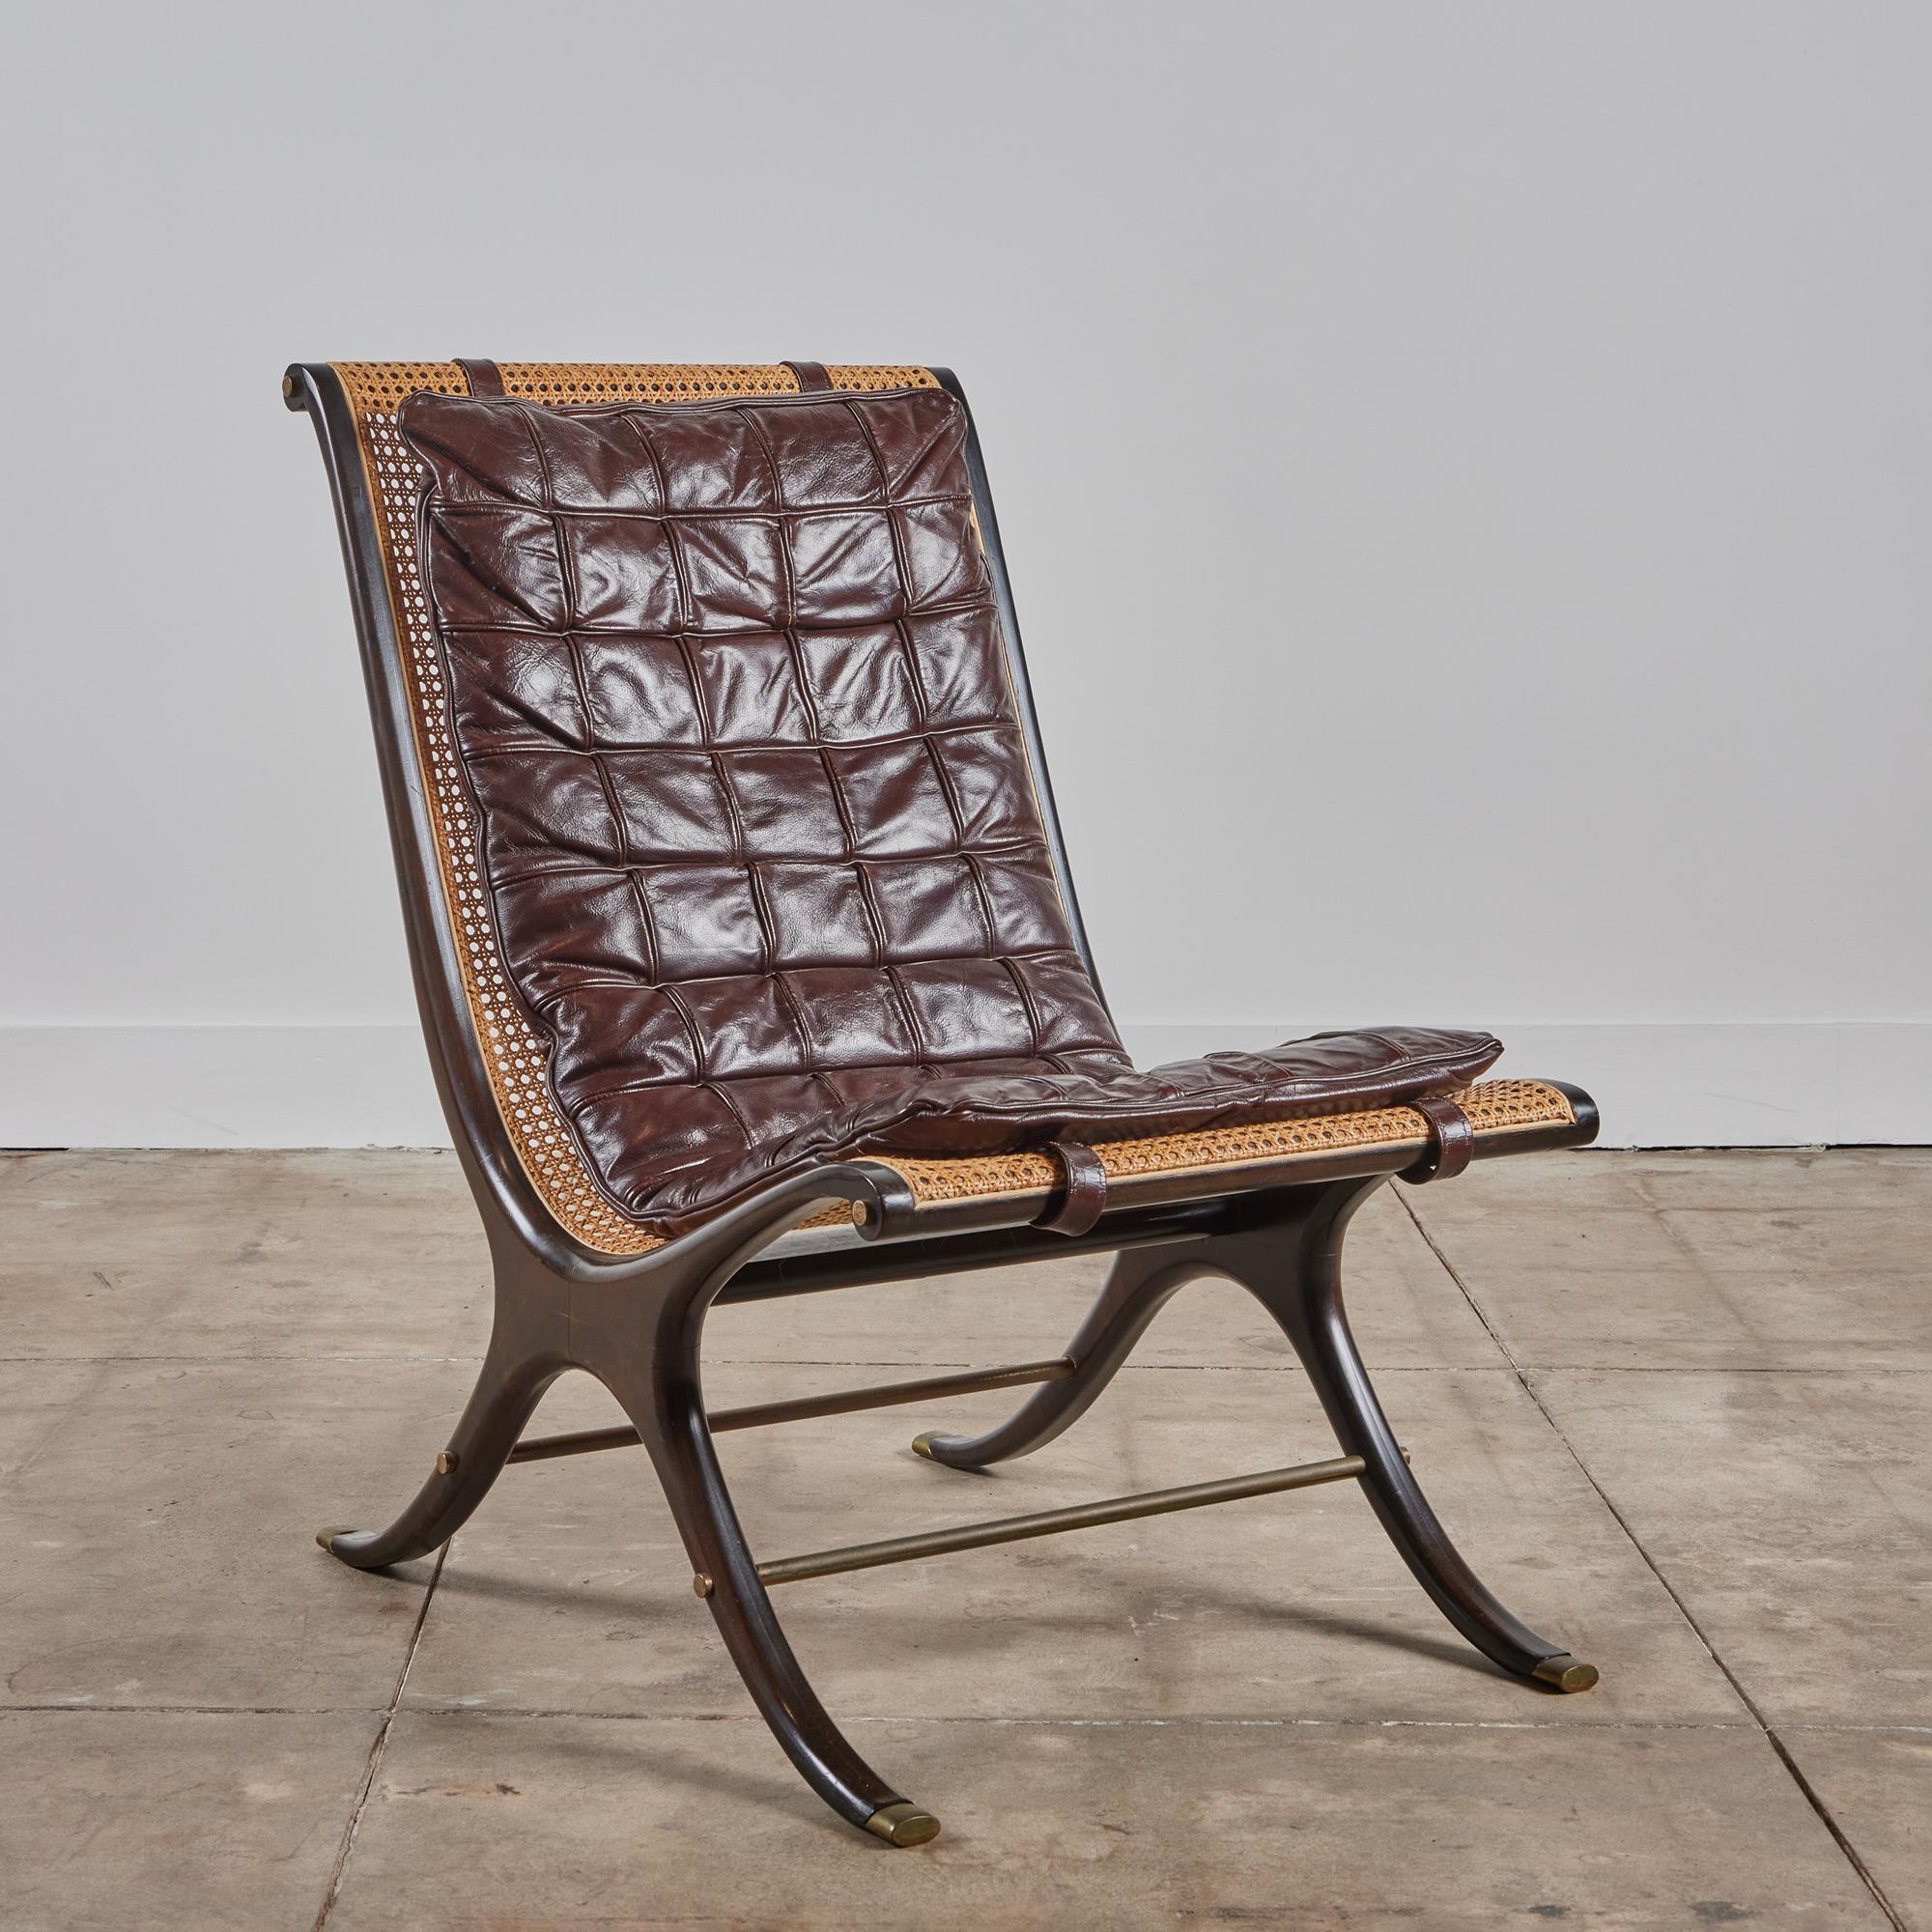 Lounge chair by Gerald Jerome for Heritage c.1960s, USA. This ebonized mahogany frame features a newly caned seat and seatback. The 